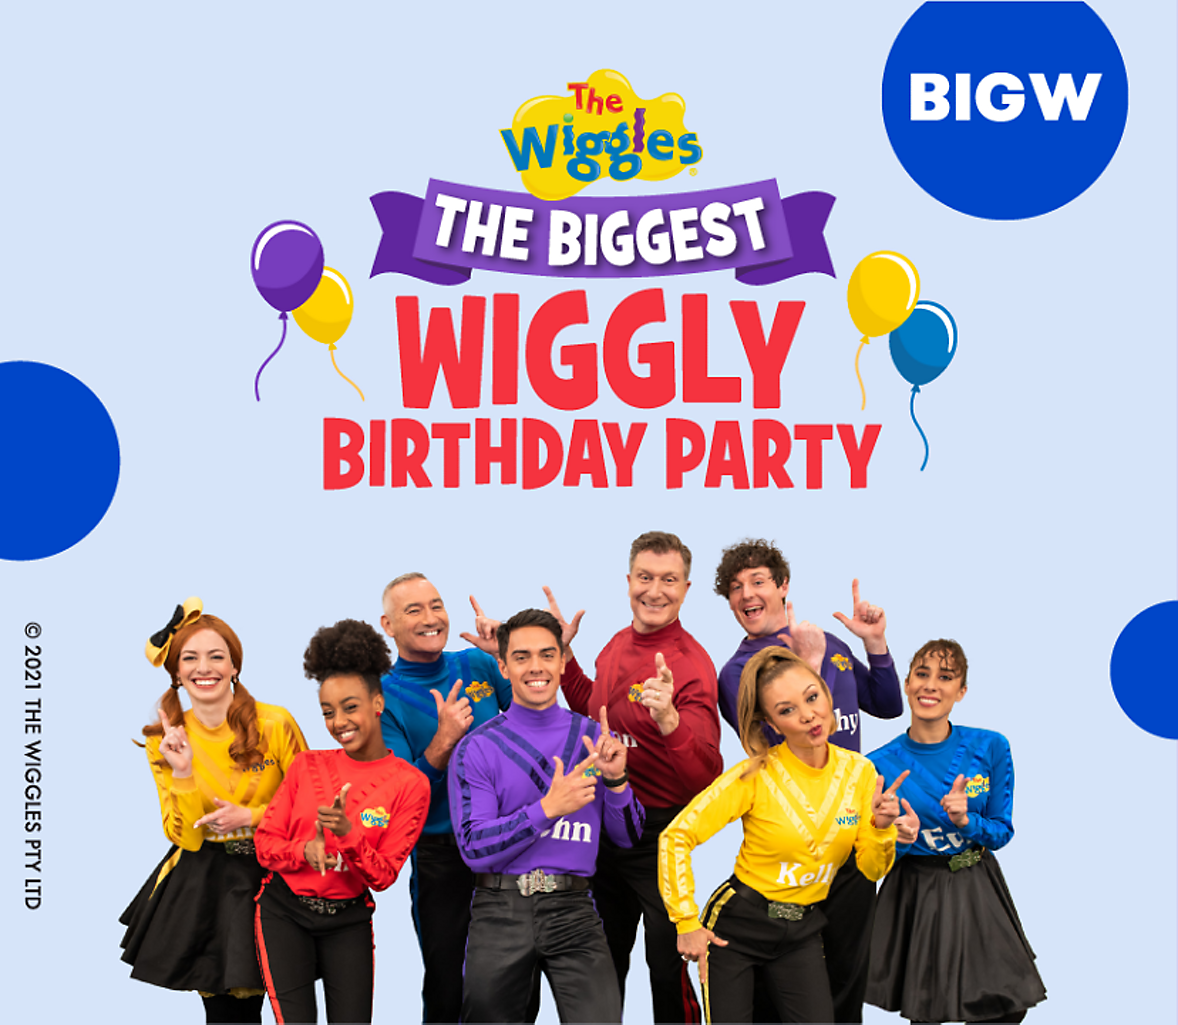 The Wiggles The Biggest Wiggly Birthday Party